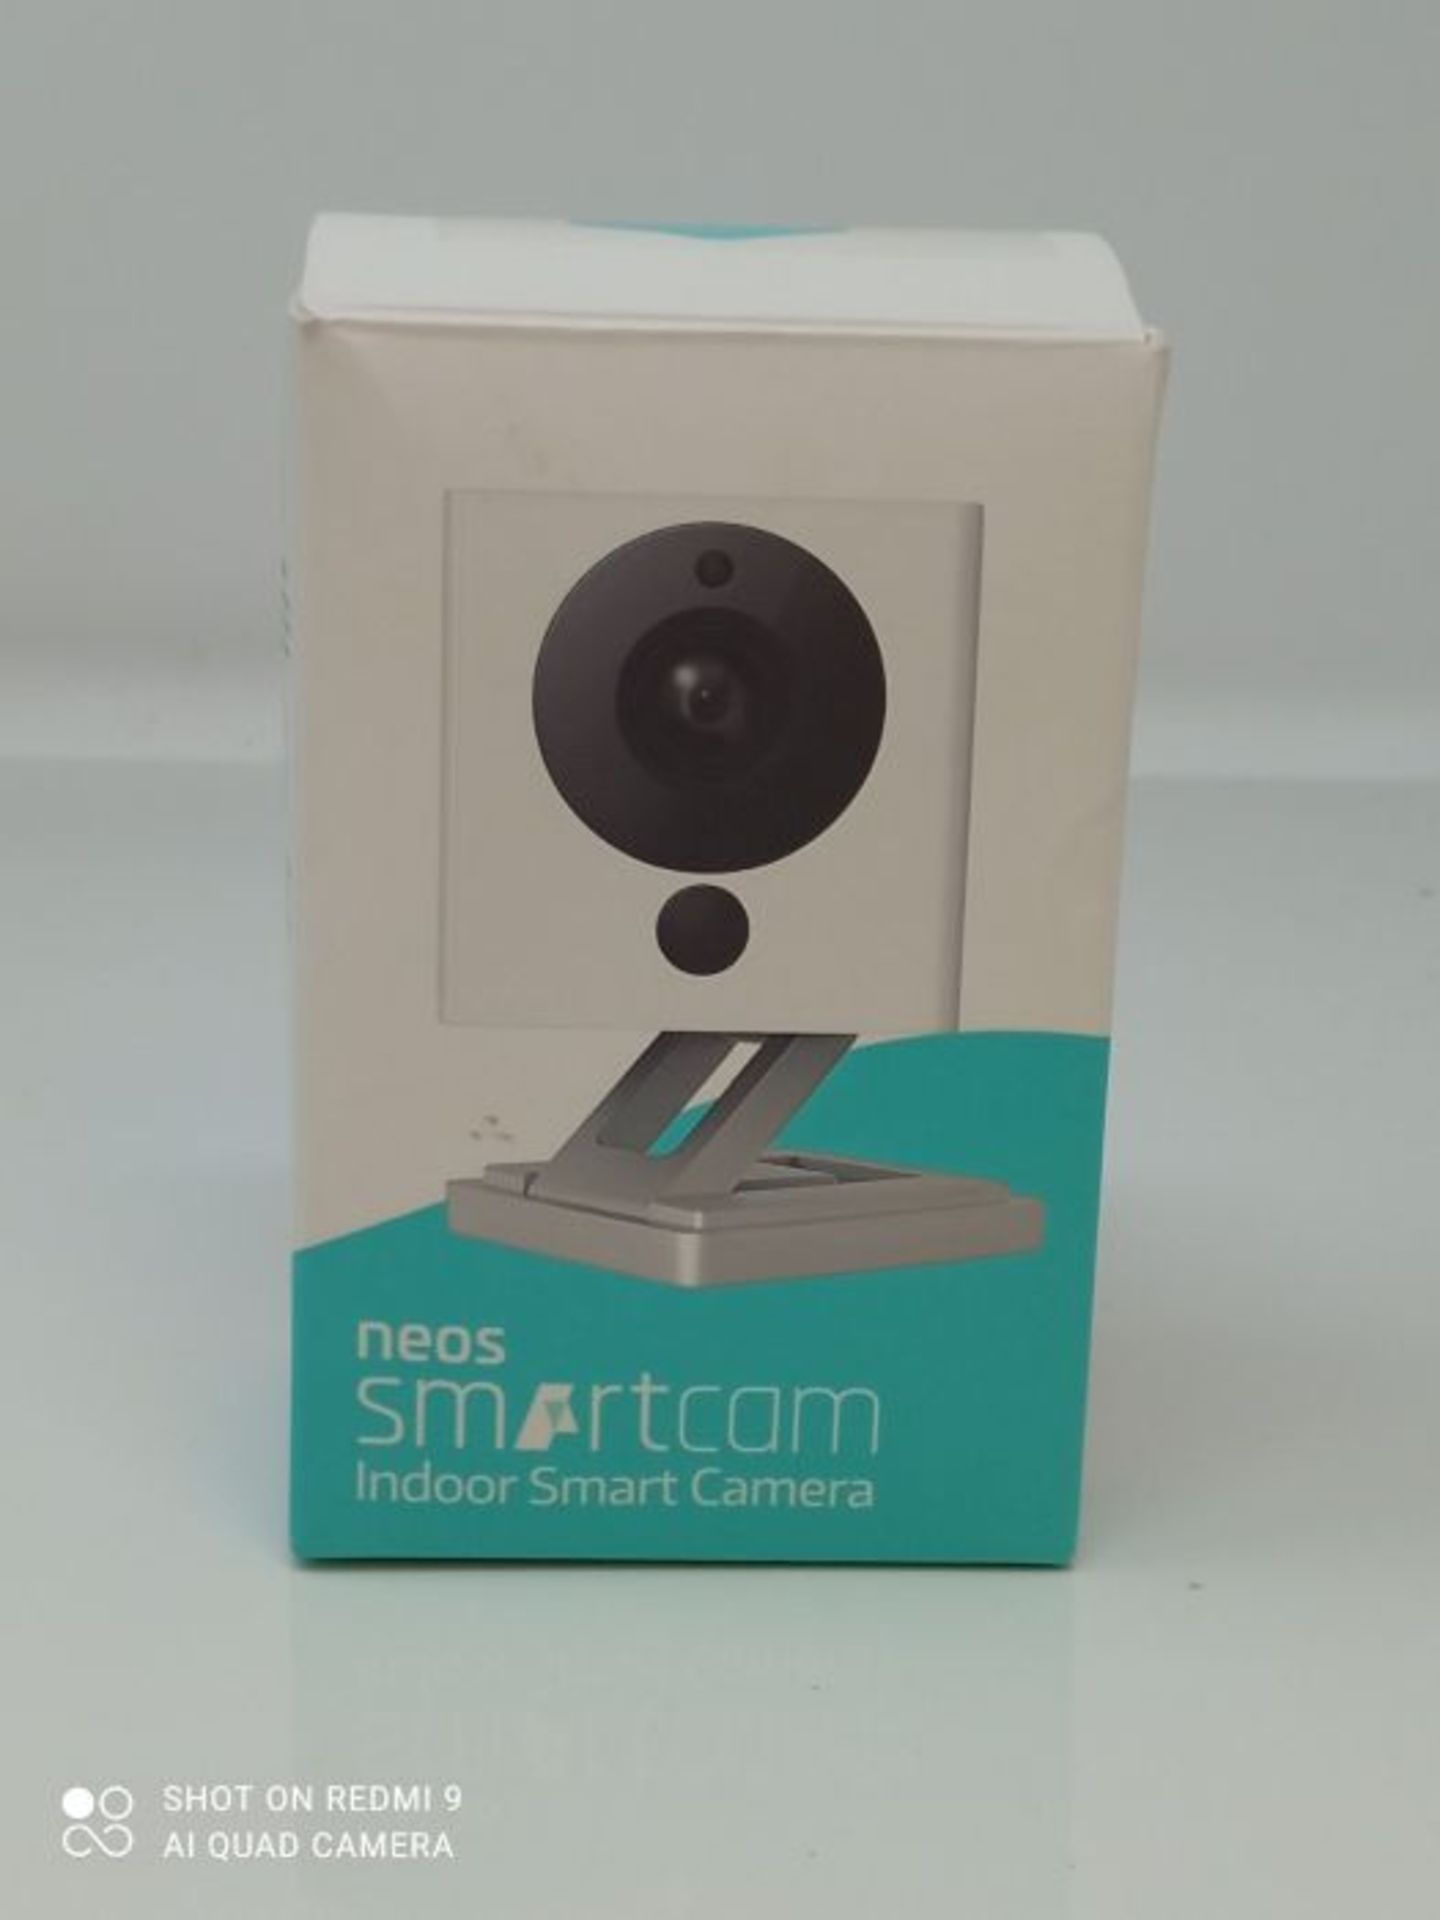 Neos SmartCam | Wi-Fi SmartHome Security Camera, Works with Alexa, 1080P HD Video, Nig - Image 3 of 3